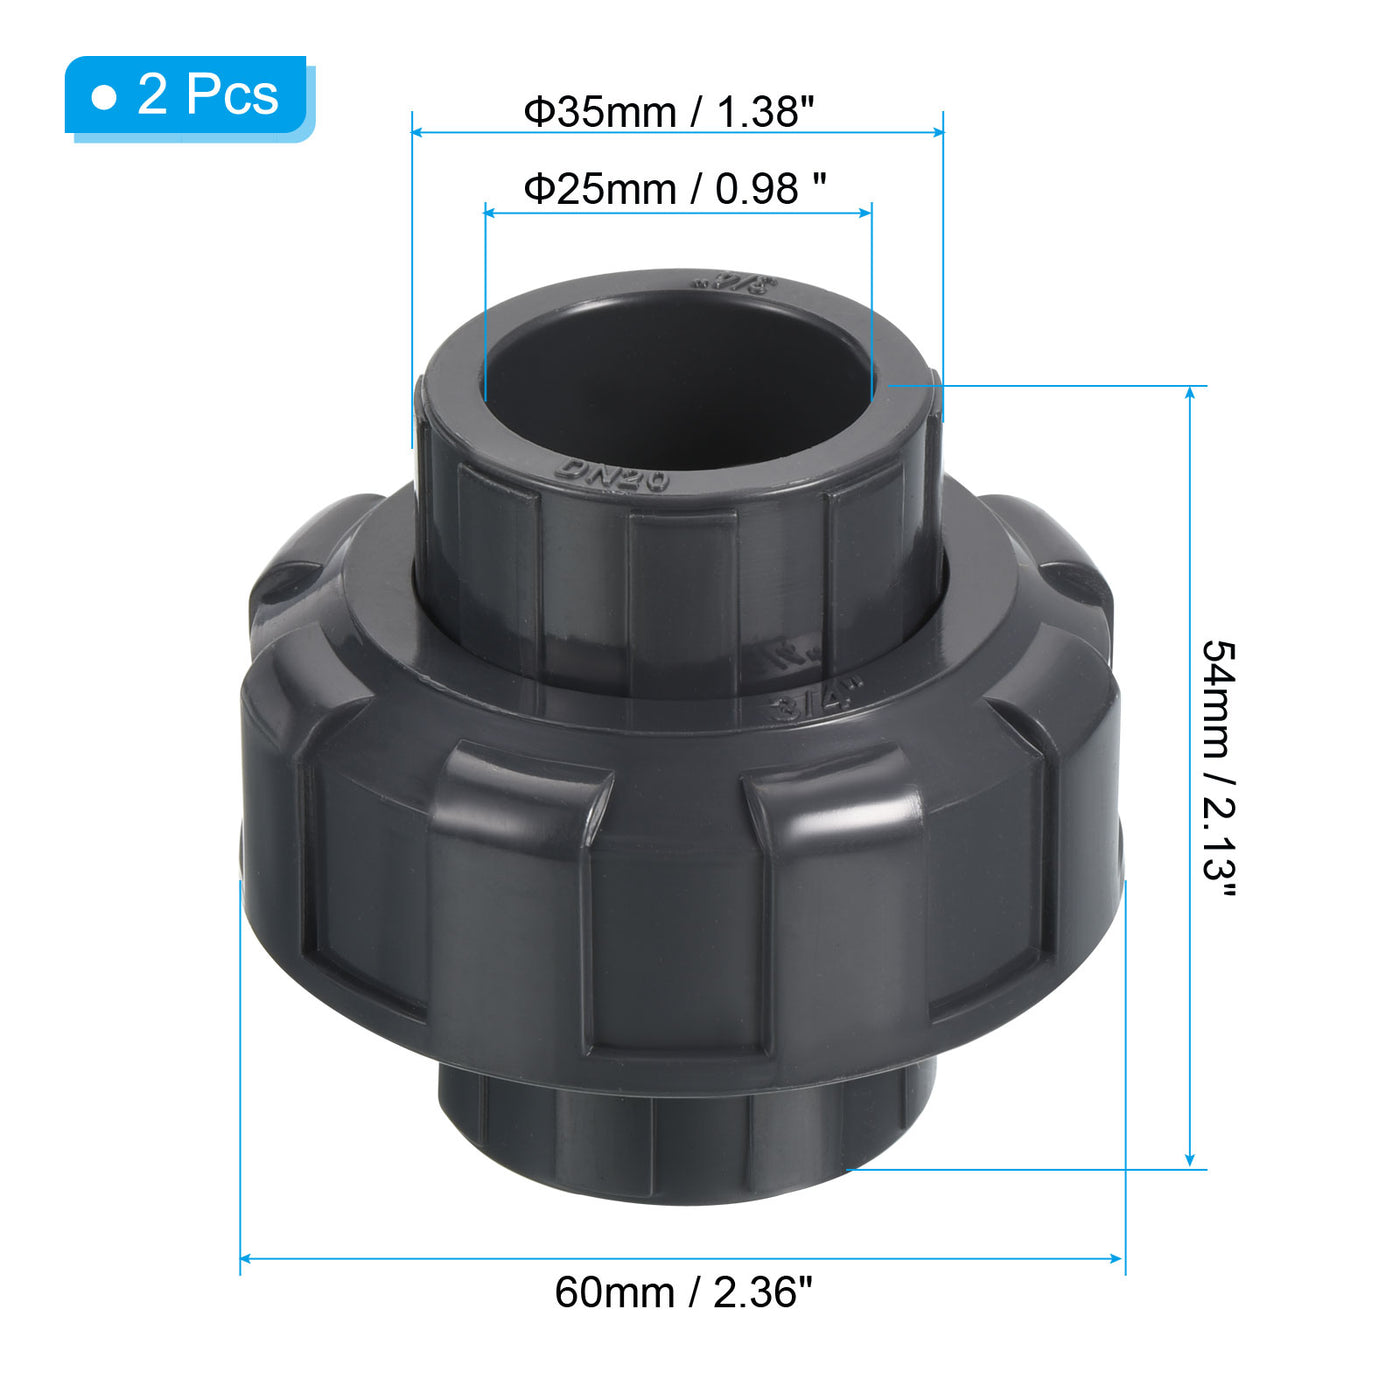 Harfington UPVC Pipe Fitting 3/4" Socket, 2 Pack Straight Joint Union Quick Connector, Grey